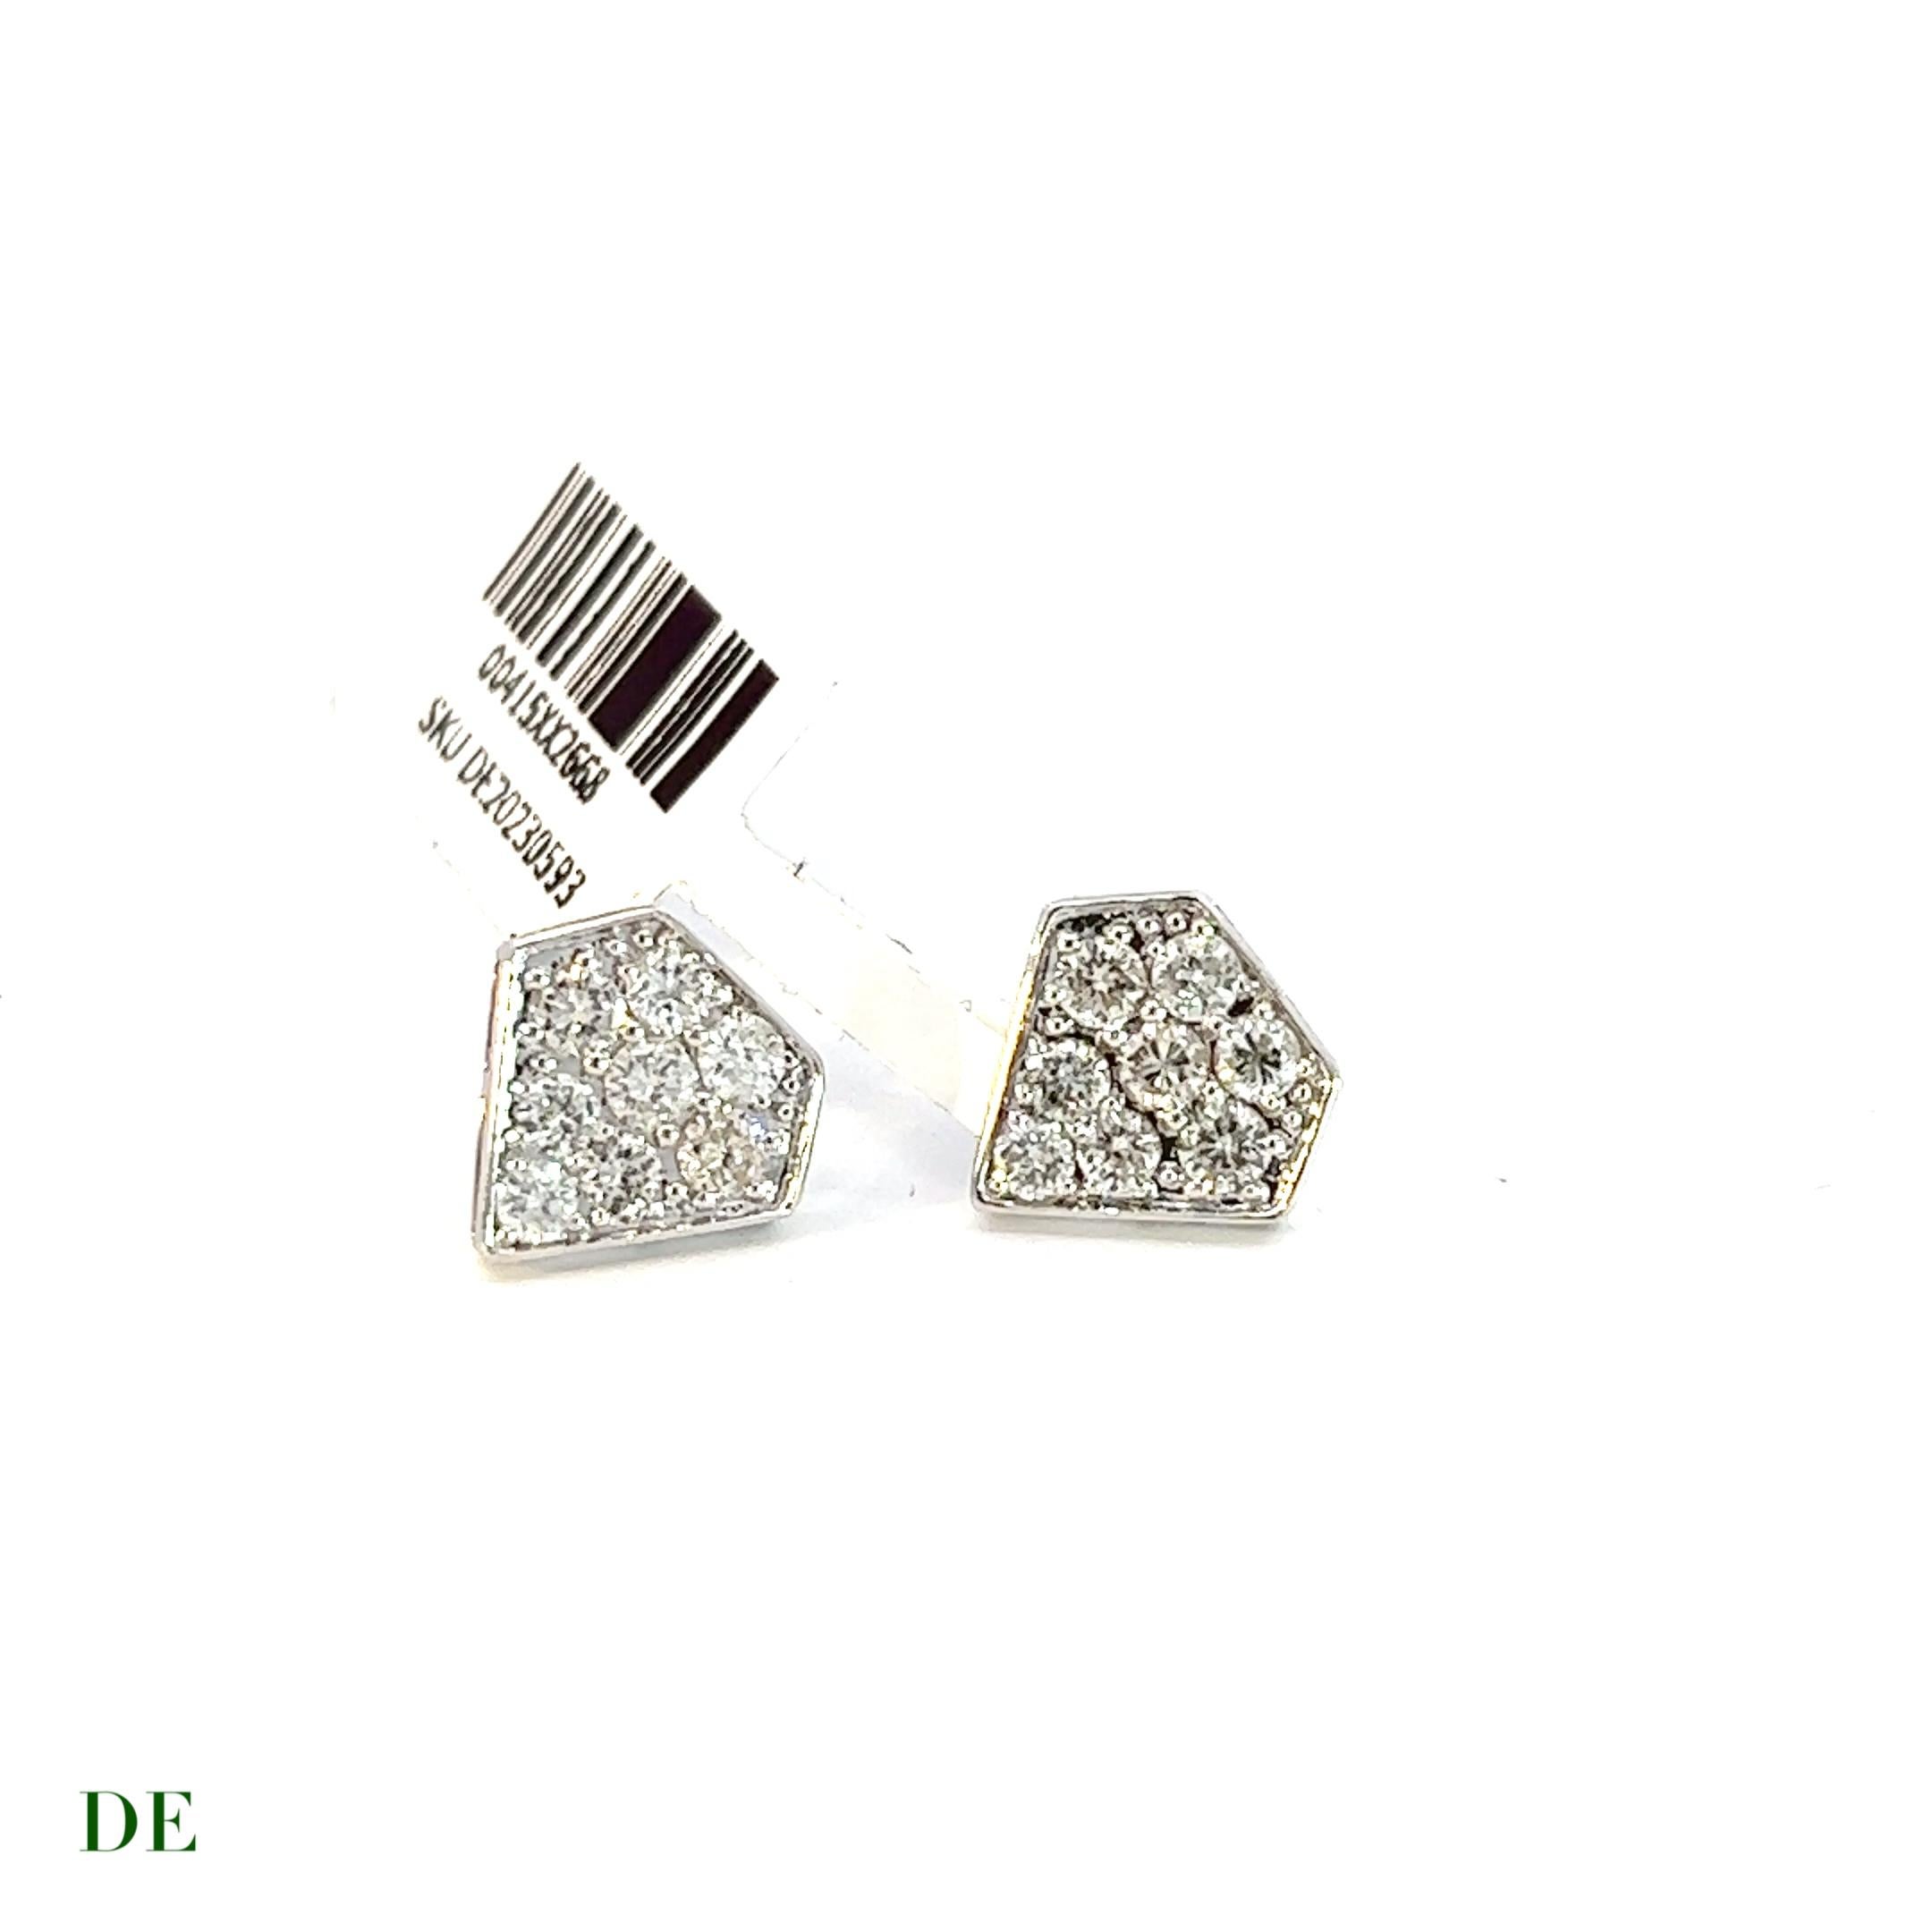 This diamond stud earring is a stunning piece of jewelry that exudes elegance and sophistication. It features a unique diamond-shaped design that is both modern and timeless. The earring is adorned with 1.34 carats of natural diamonds, which gives